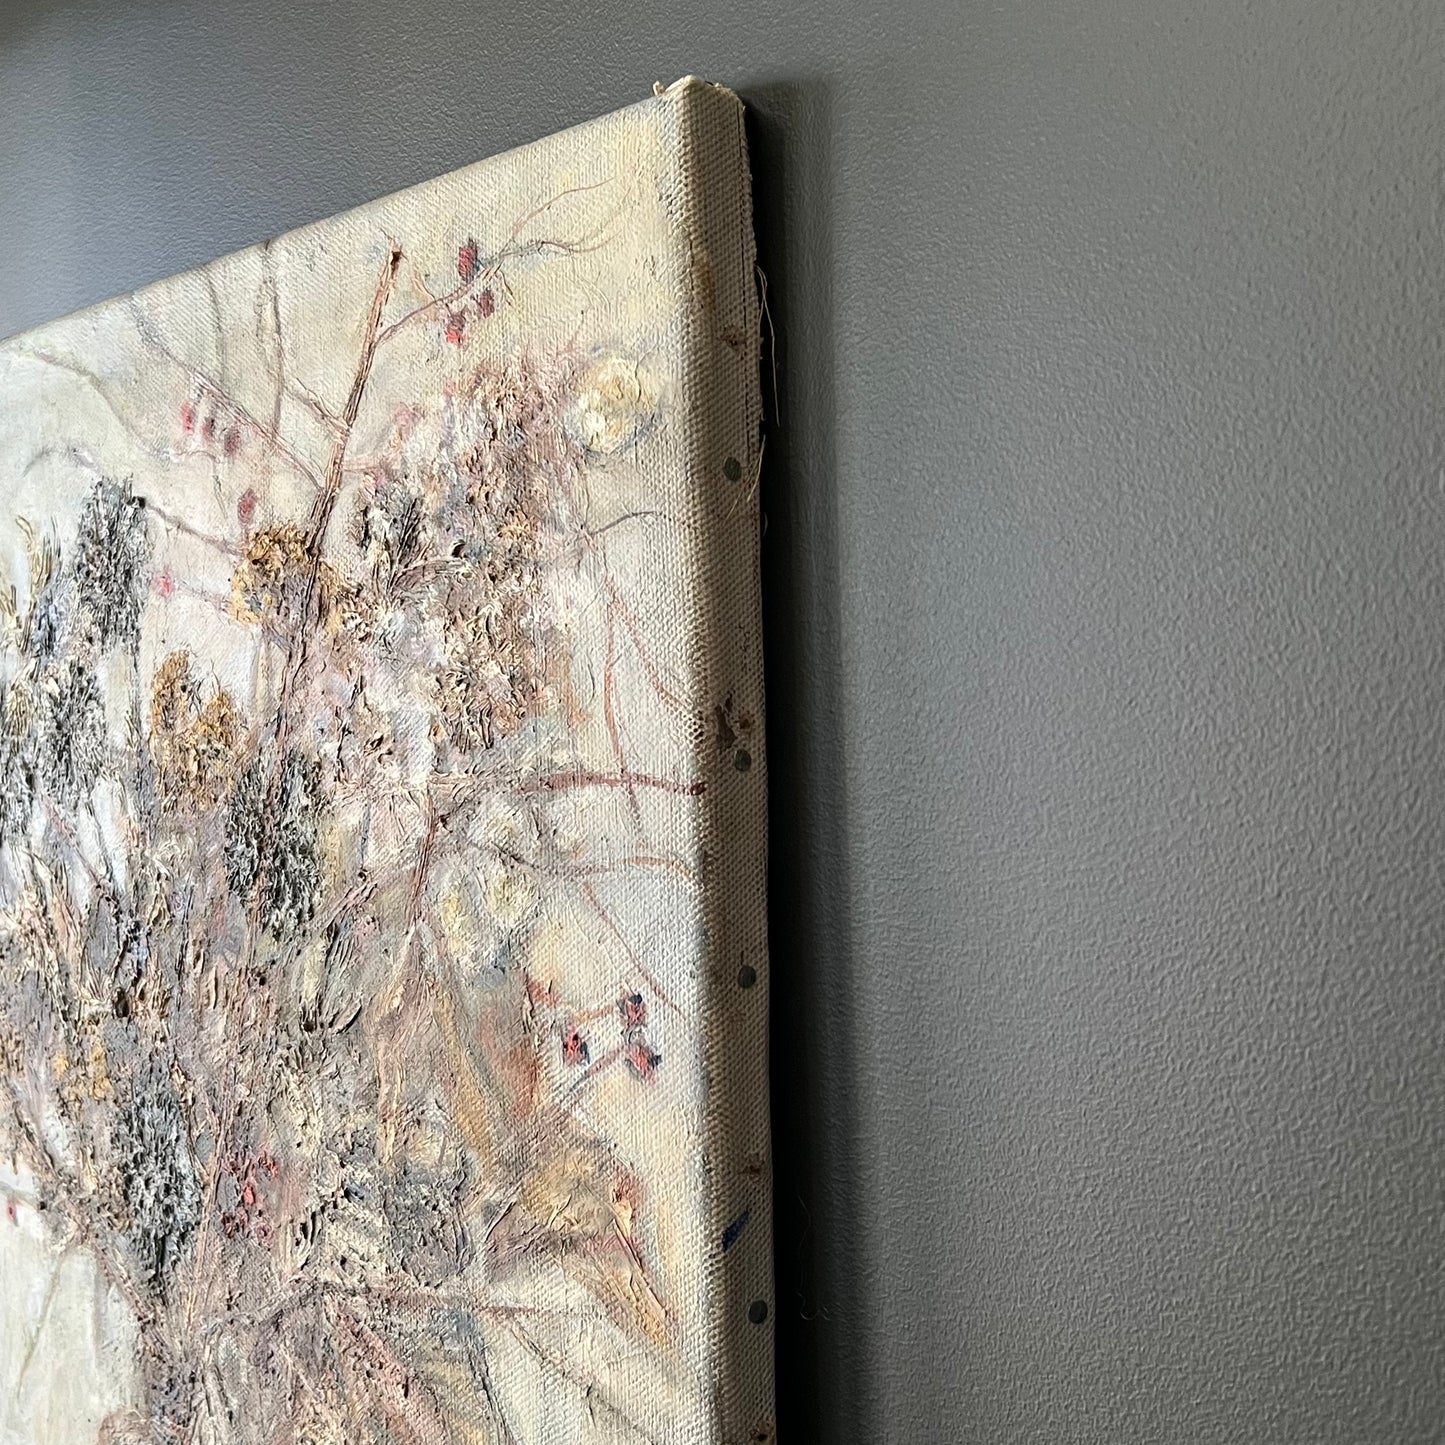 Vintage Dutch Oil Painting Textured Dried Blooms & Music Sheets